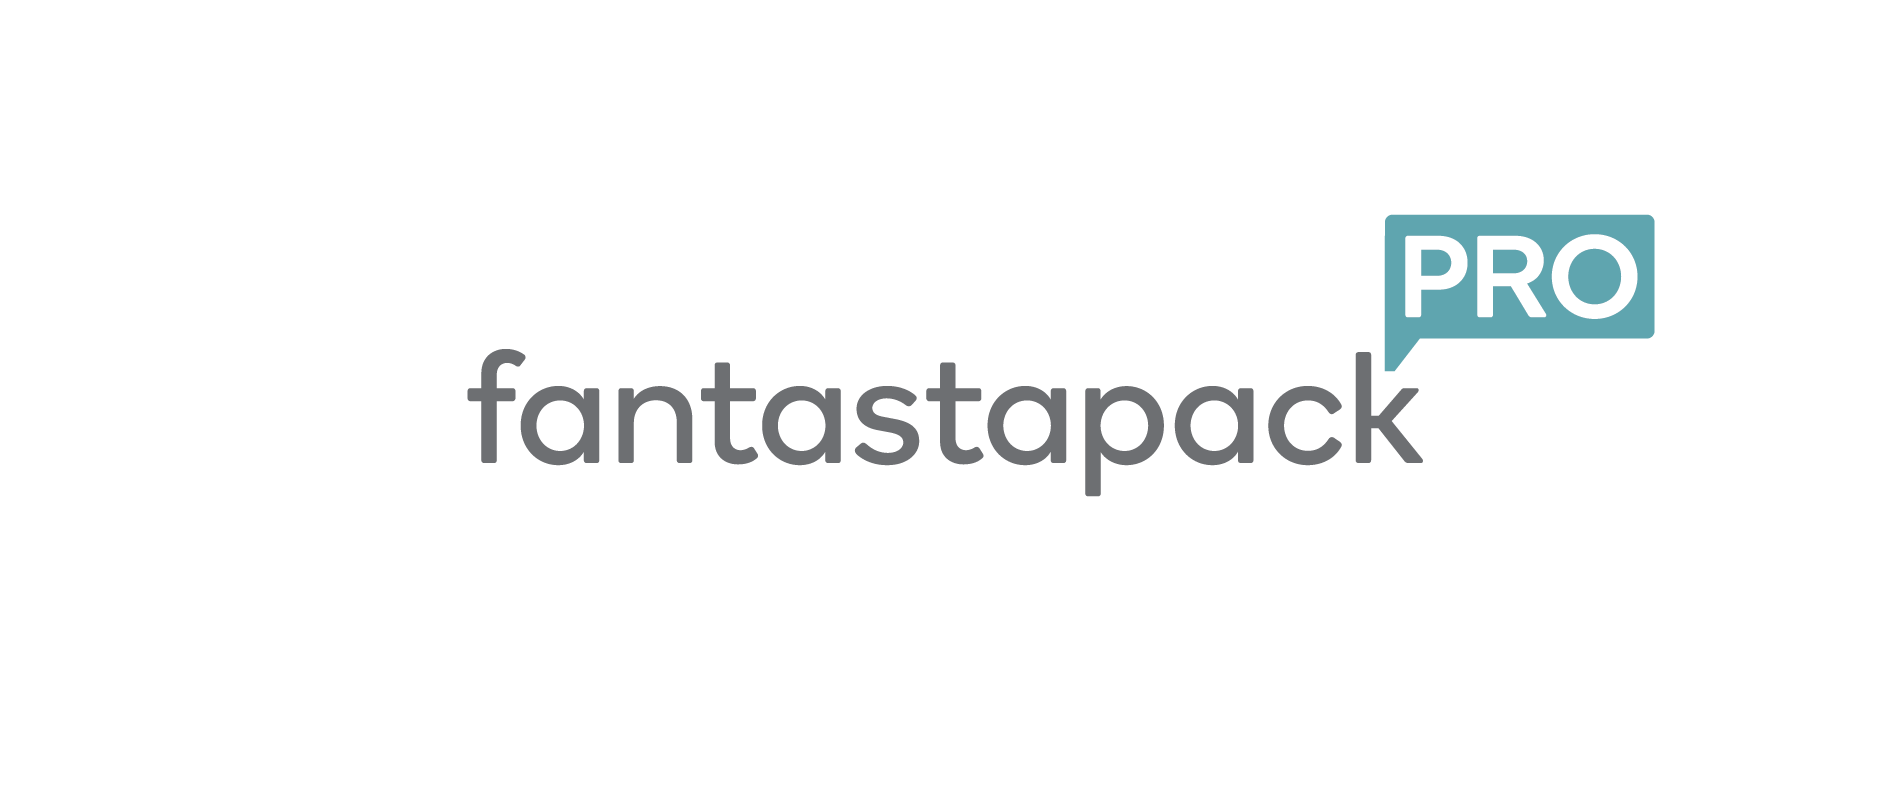 Introducing Fantastapack Pro for Custom Packaging Solutions & Inserts